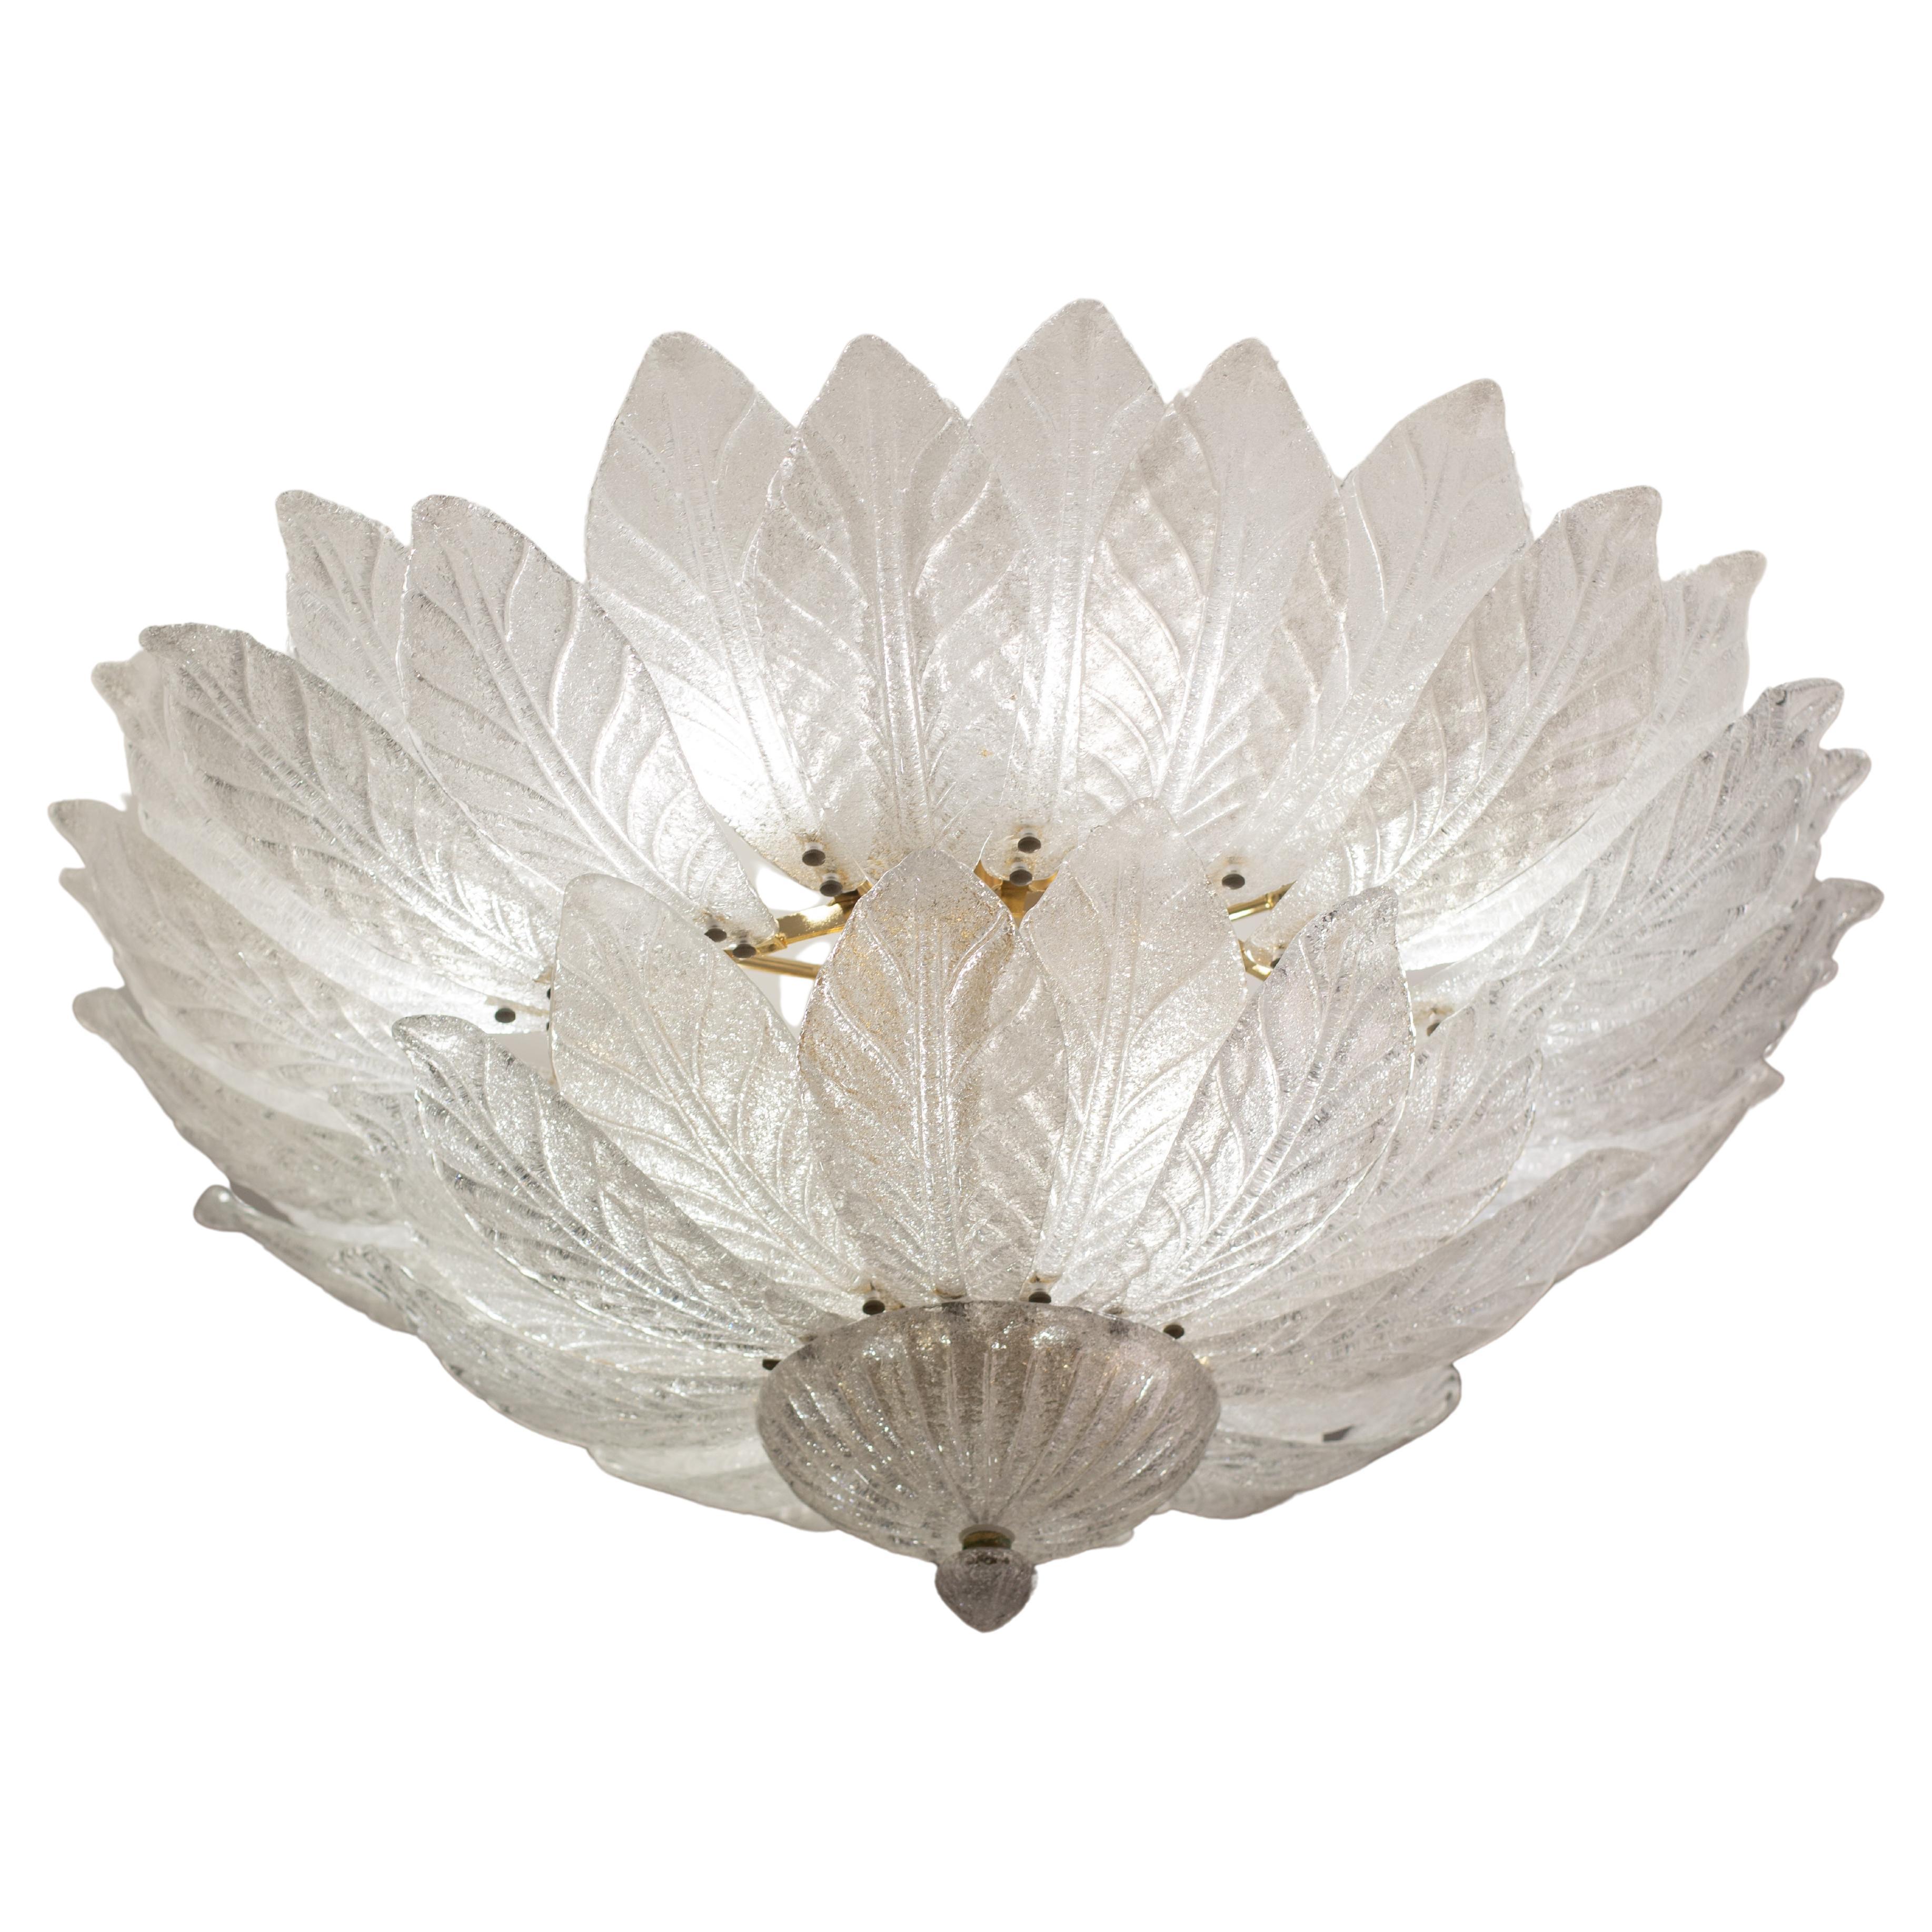 Large and elegant built-in Murano glass chandelier in neoclassical style, Italy, circa 1970s.
The Murano chandelier, in the Mid-Century Modern style, is composed of two layers of transparent leaf glass and a gold frame.
The two layers are divided